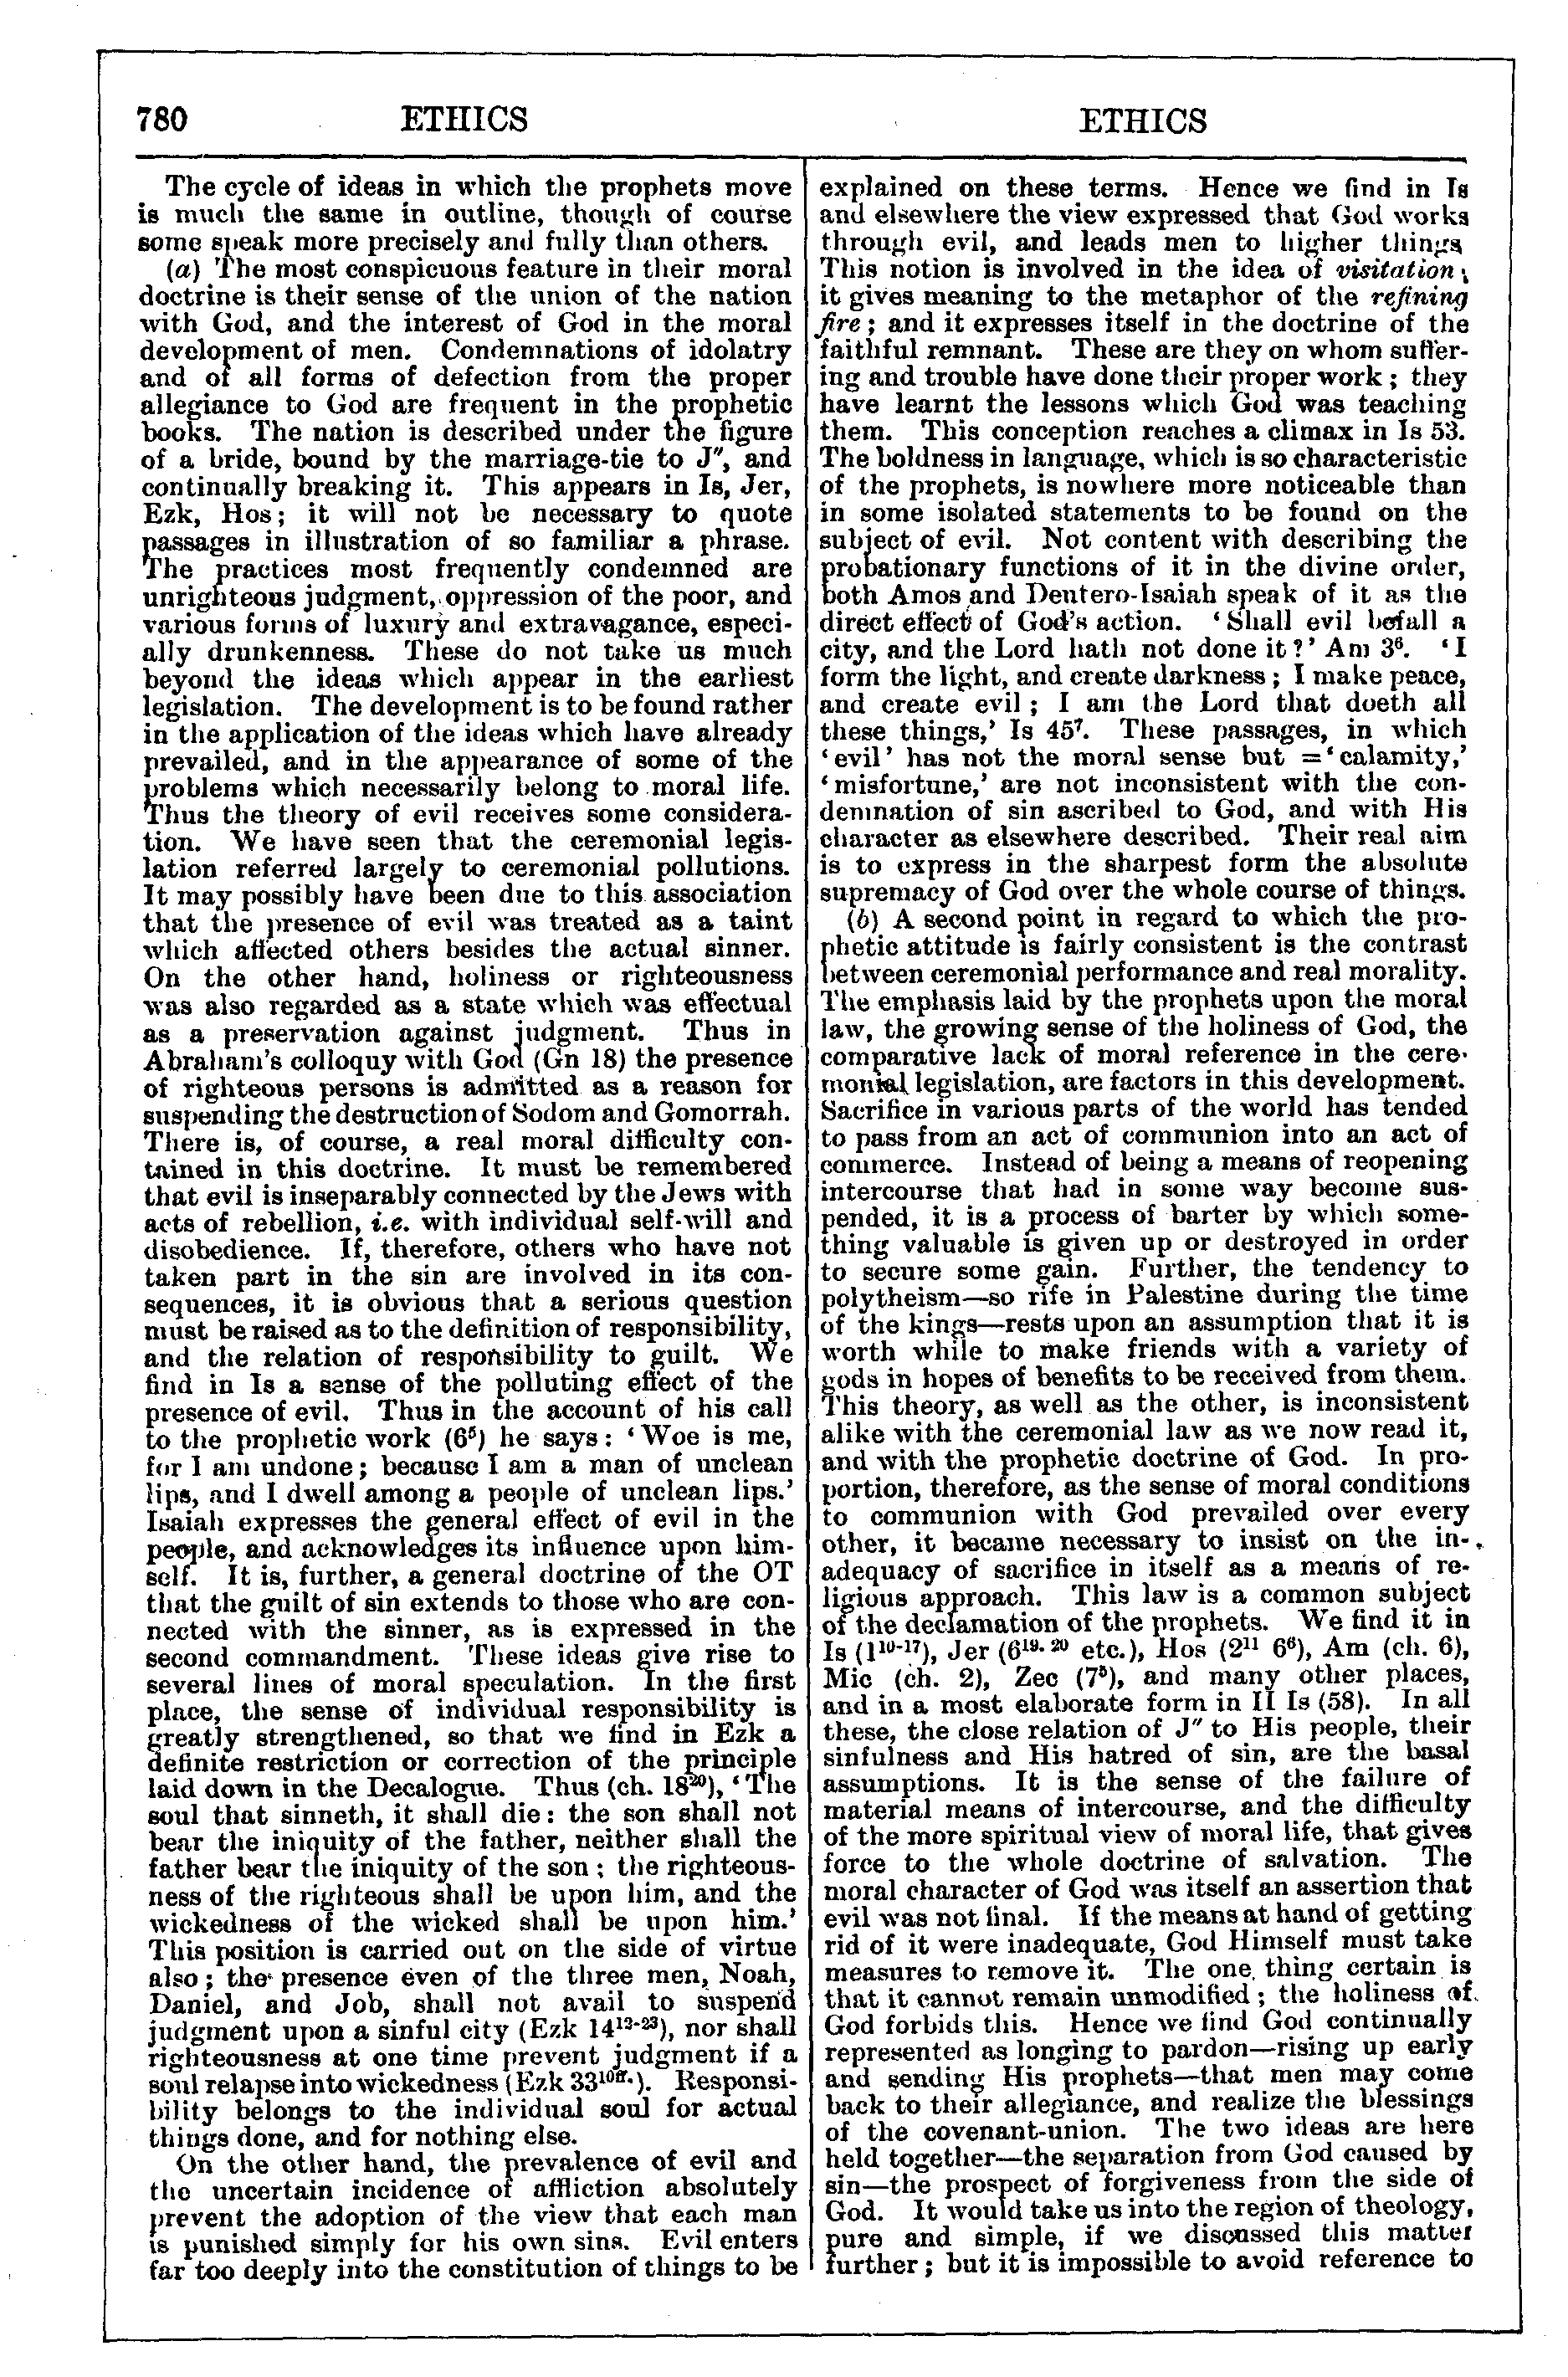 Image of page 780